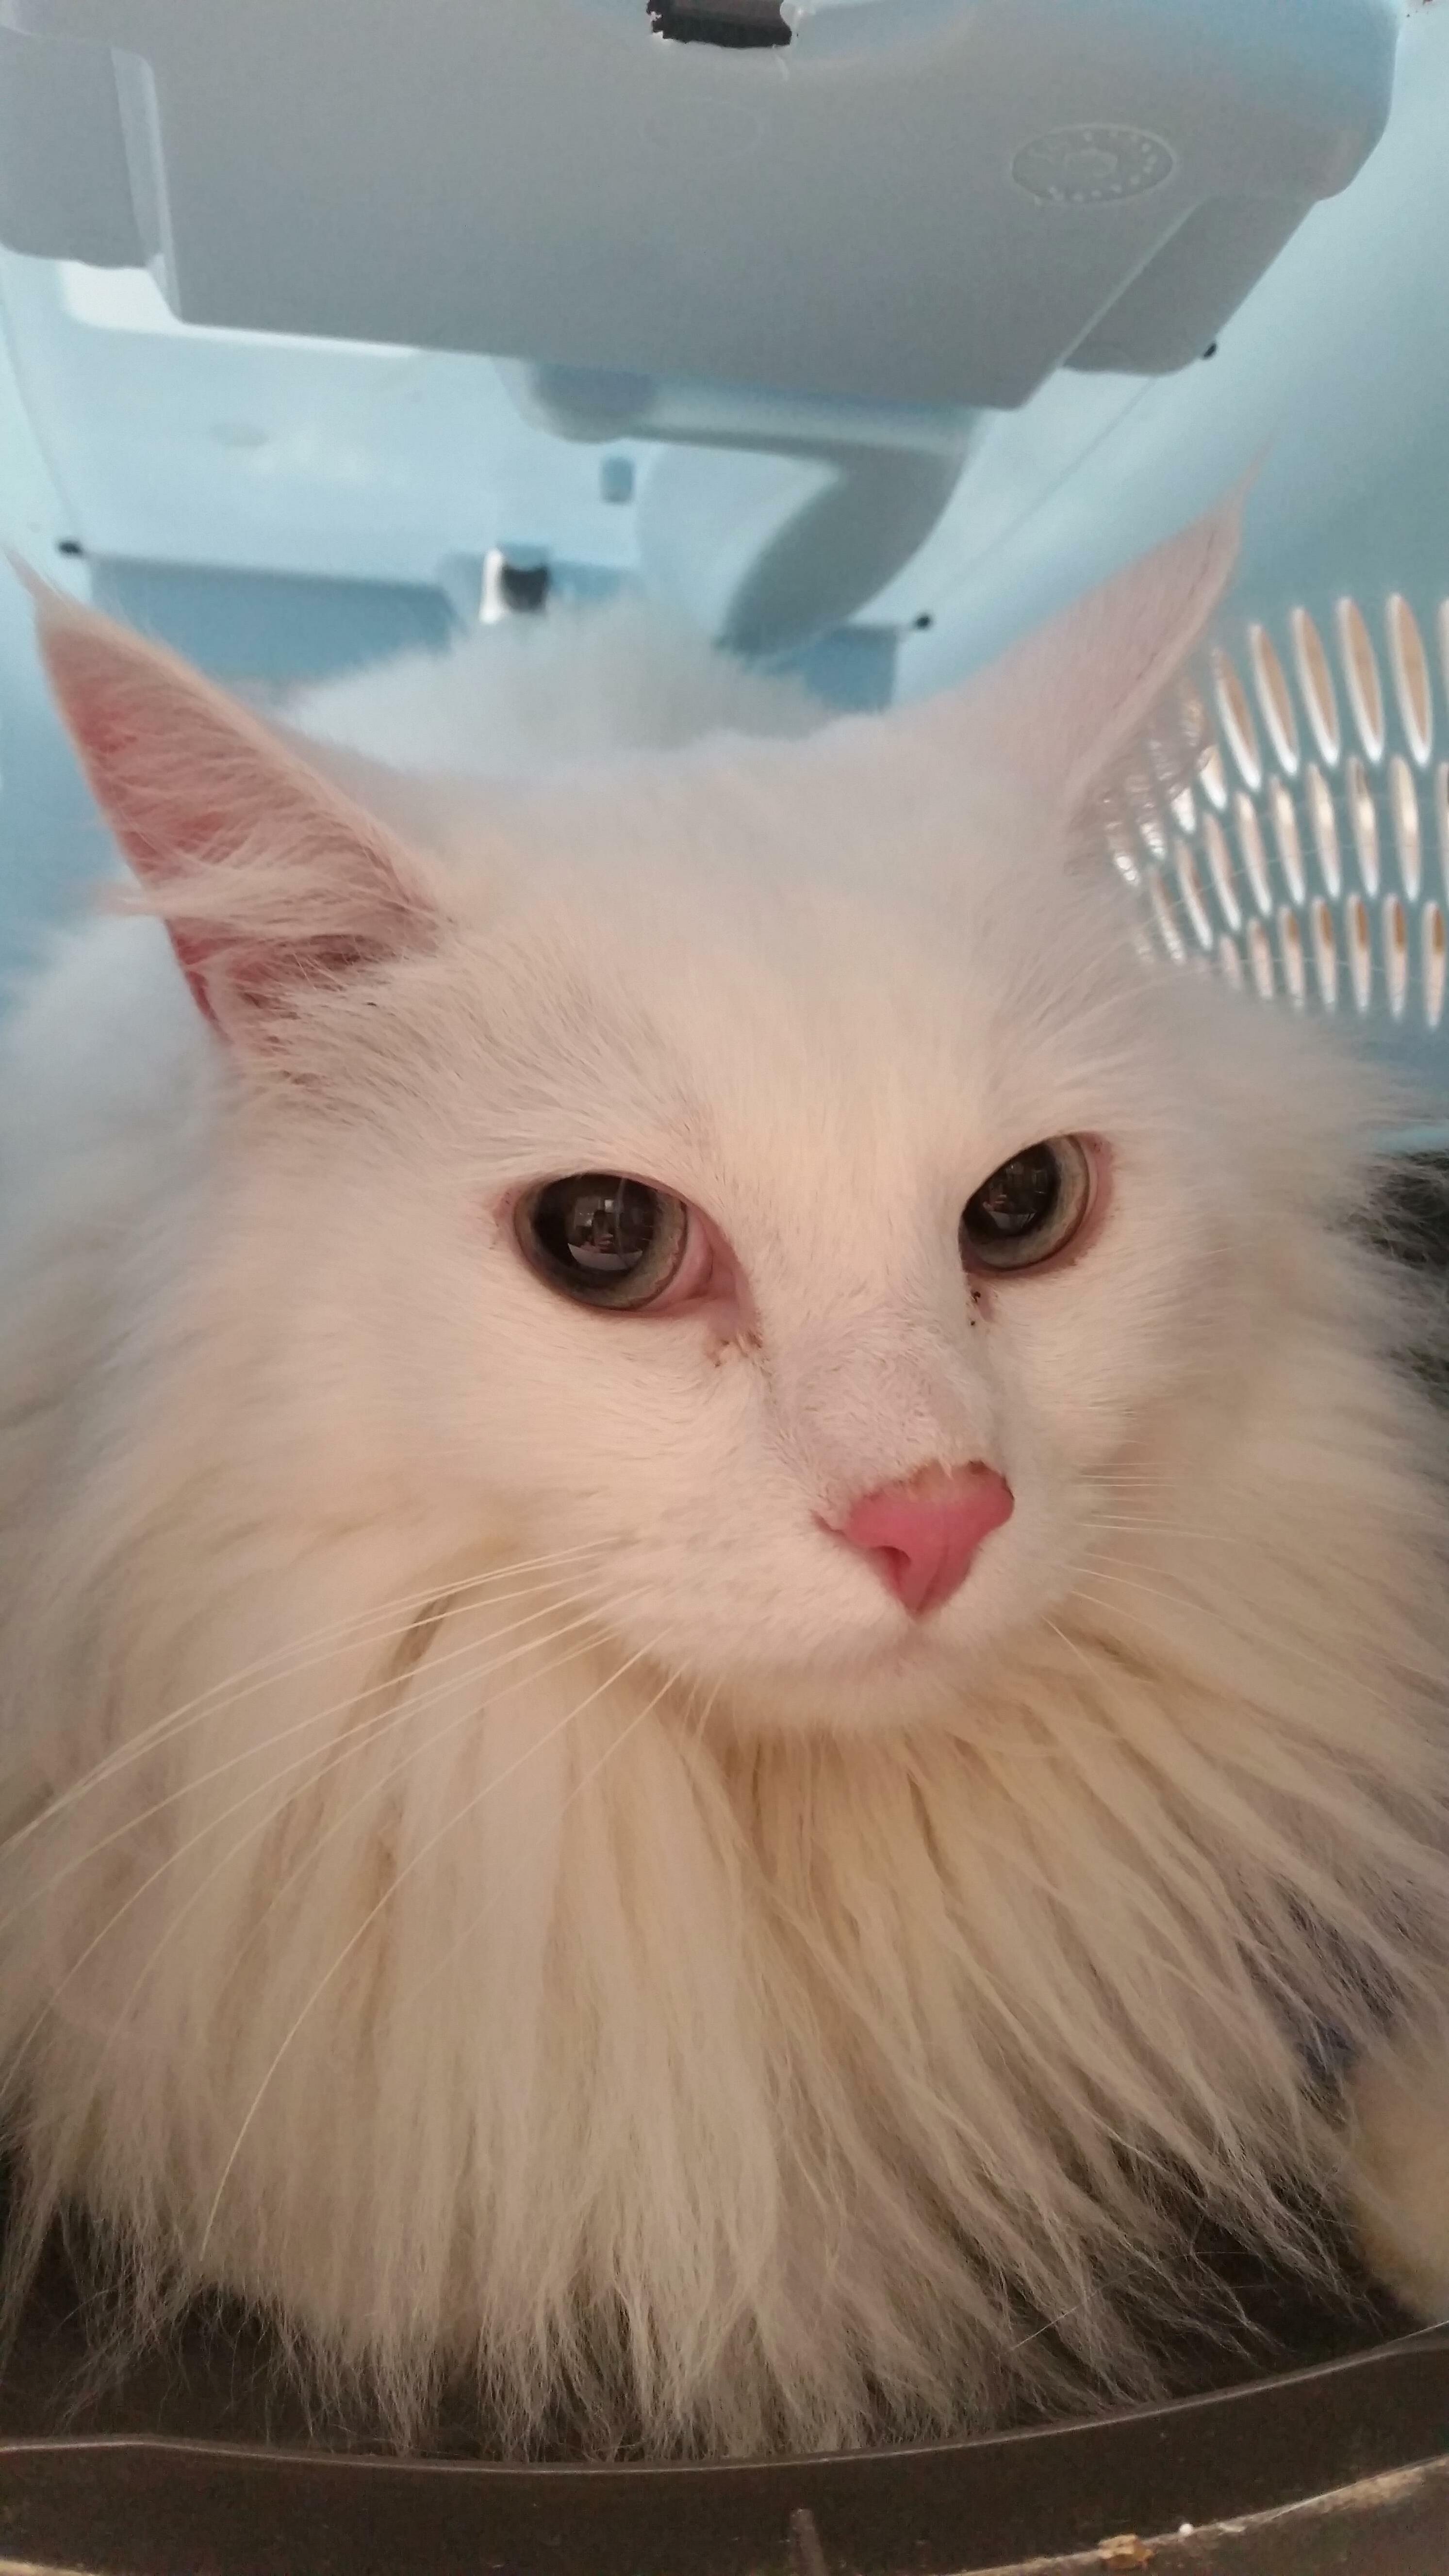 Say hi to reddit, kitten (rag doll). hes back at the vet for a follow up